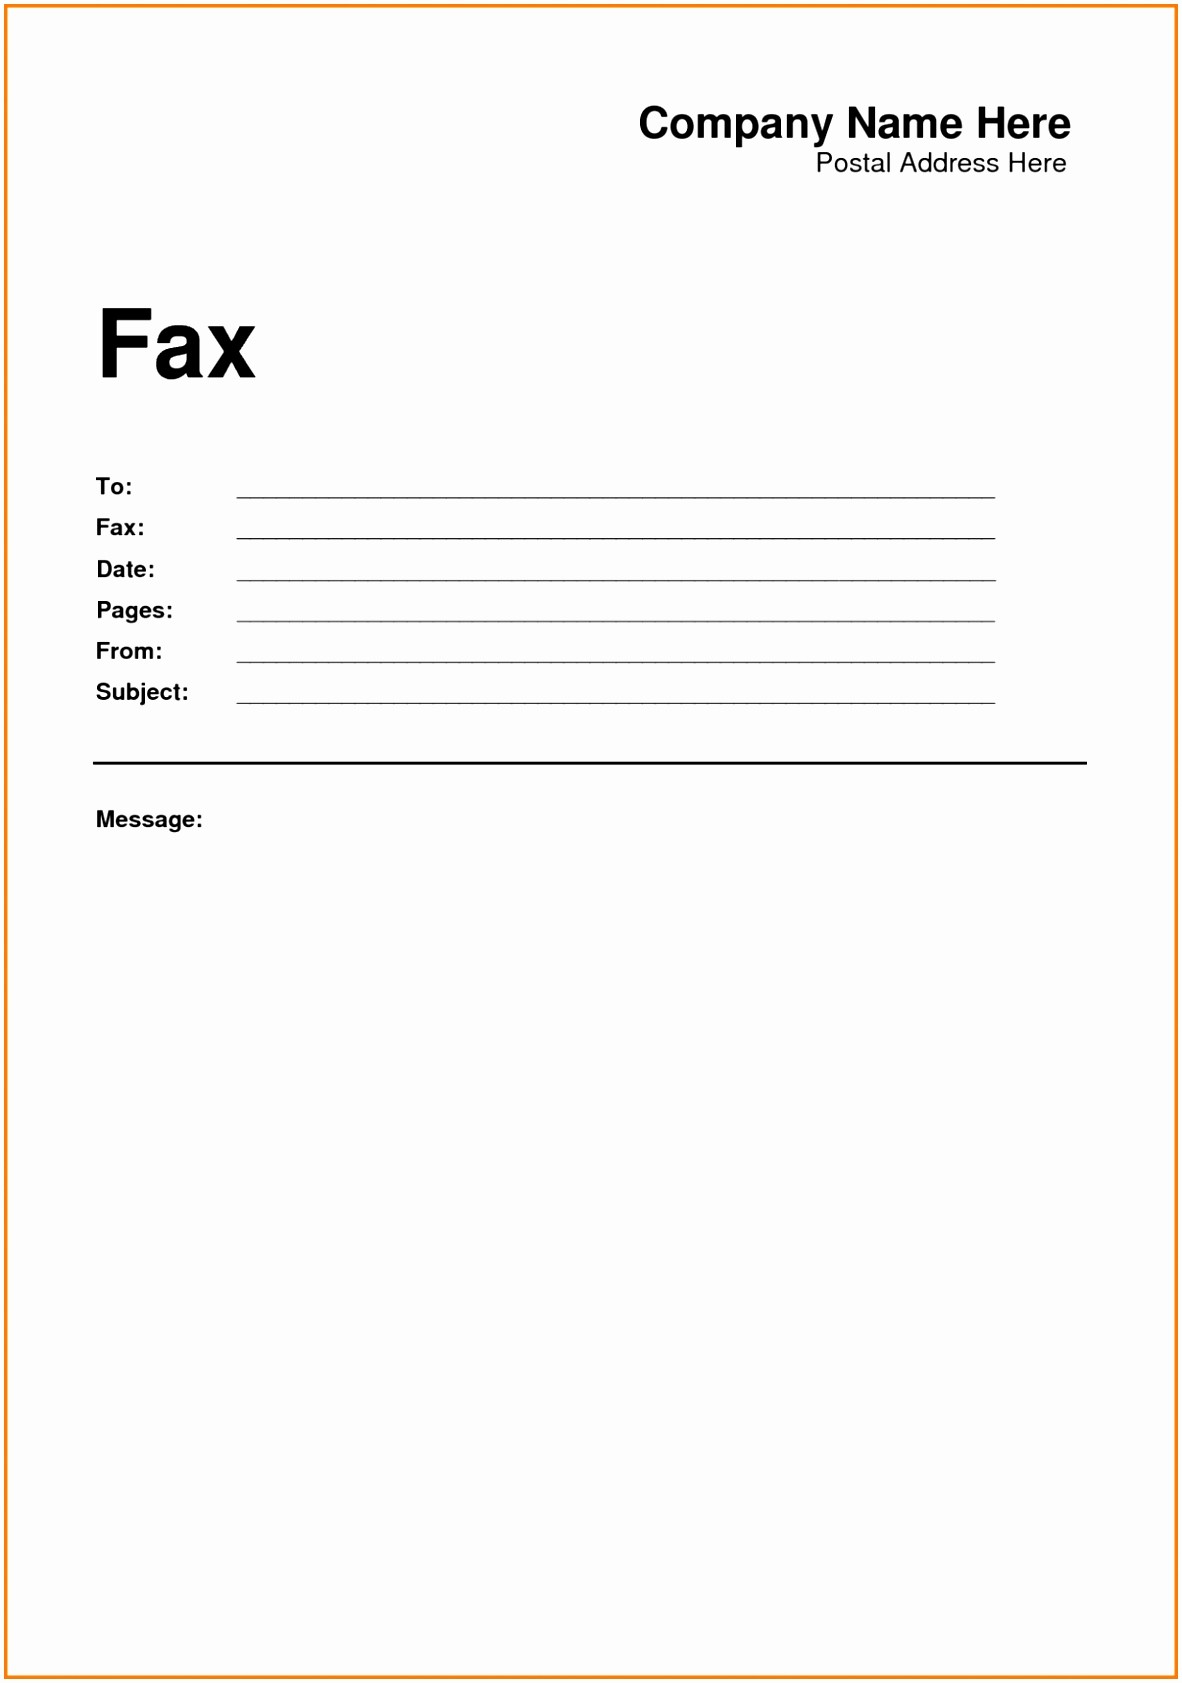 Sample Fax Cover Sheet Word Awesome Good Covering Letter Example Uk Gseokbinder Design Fax